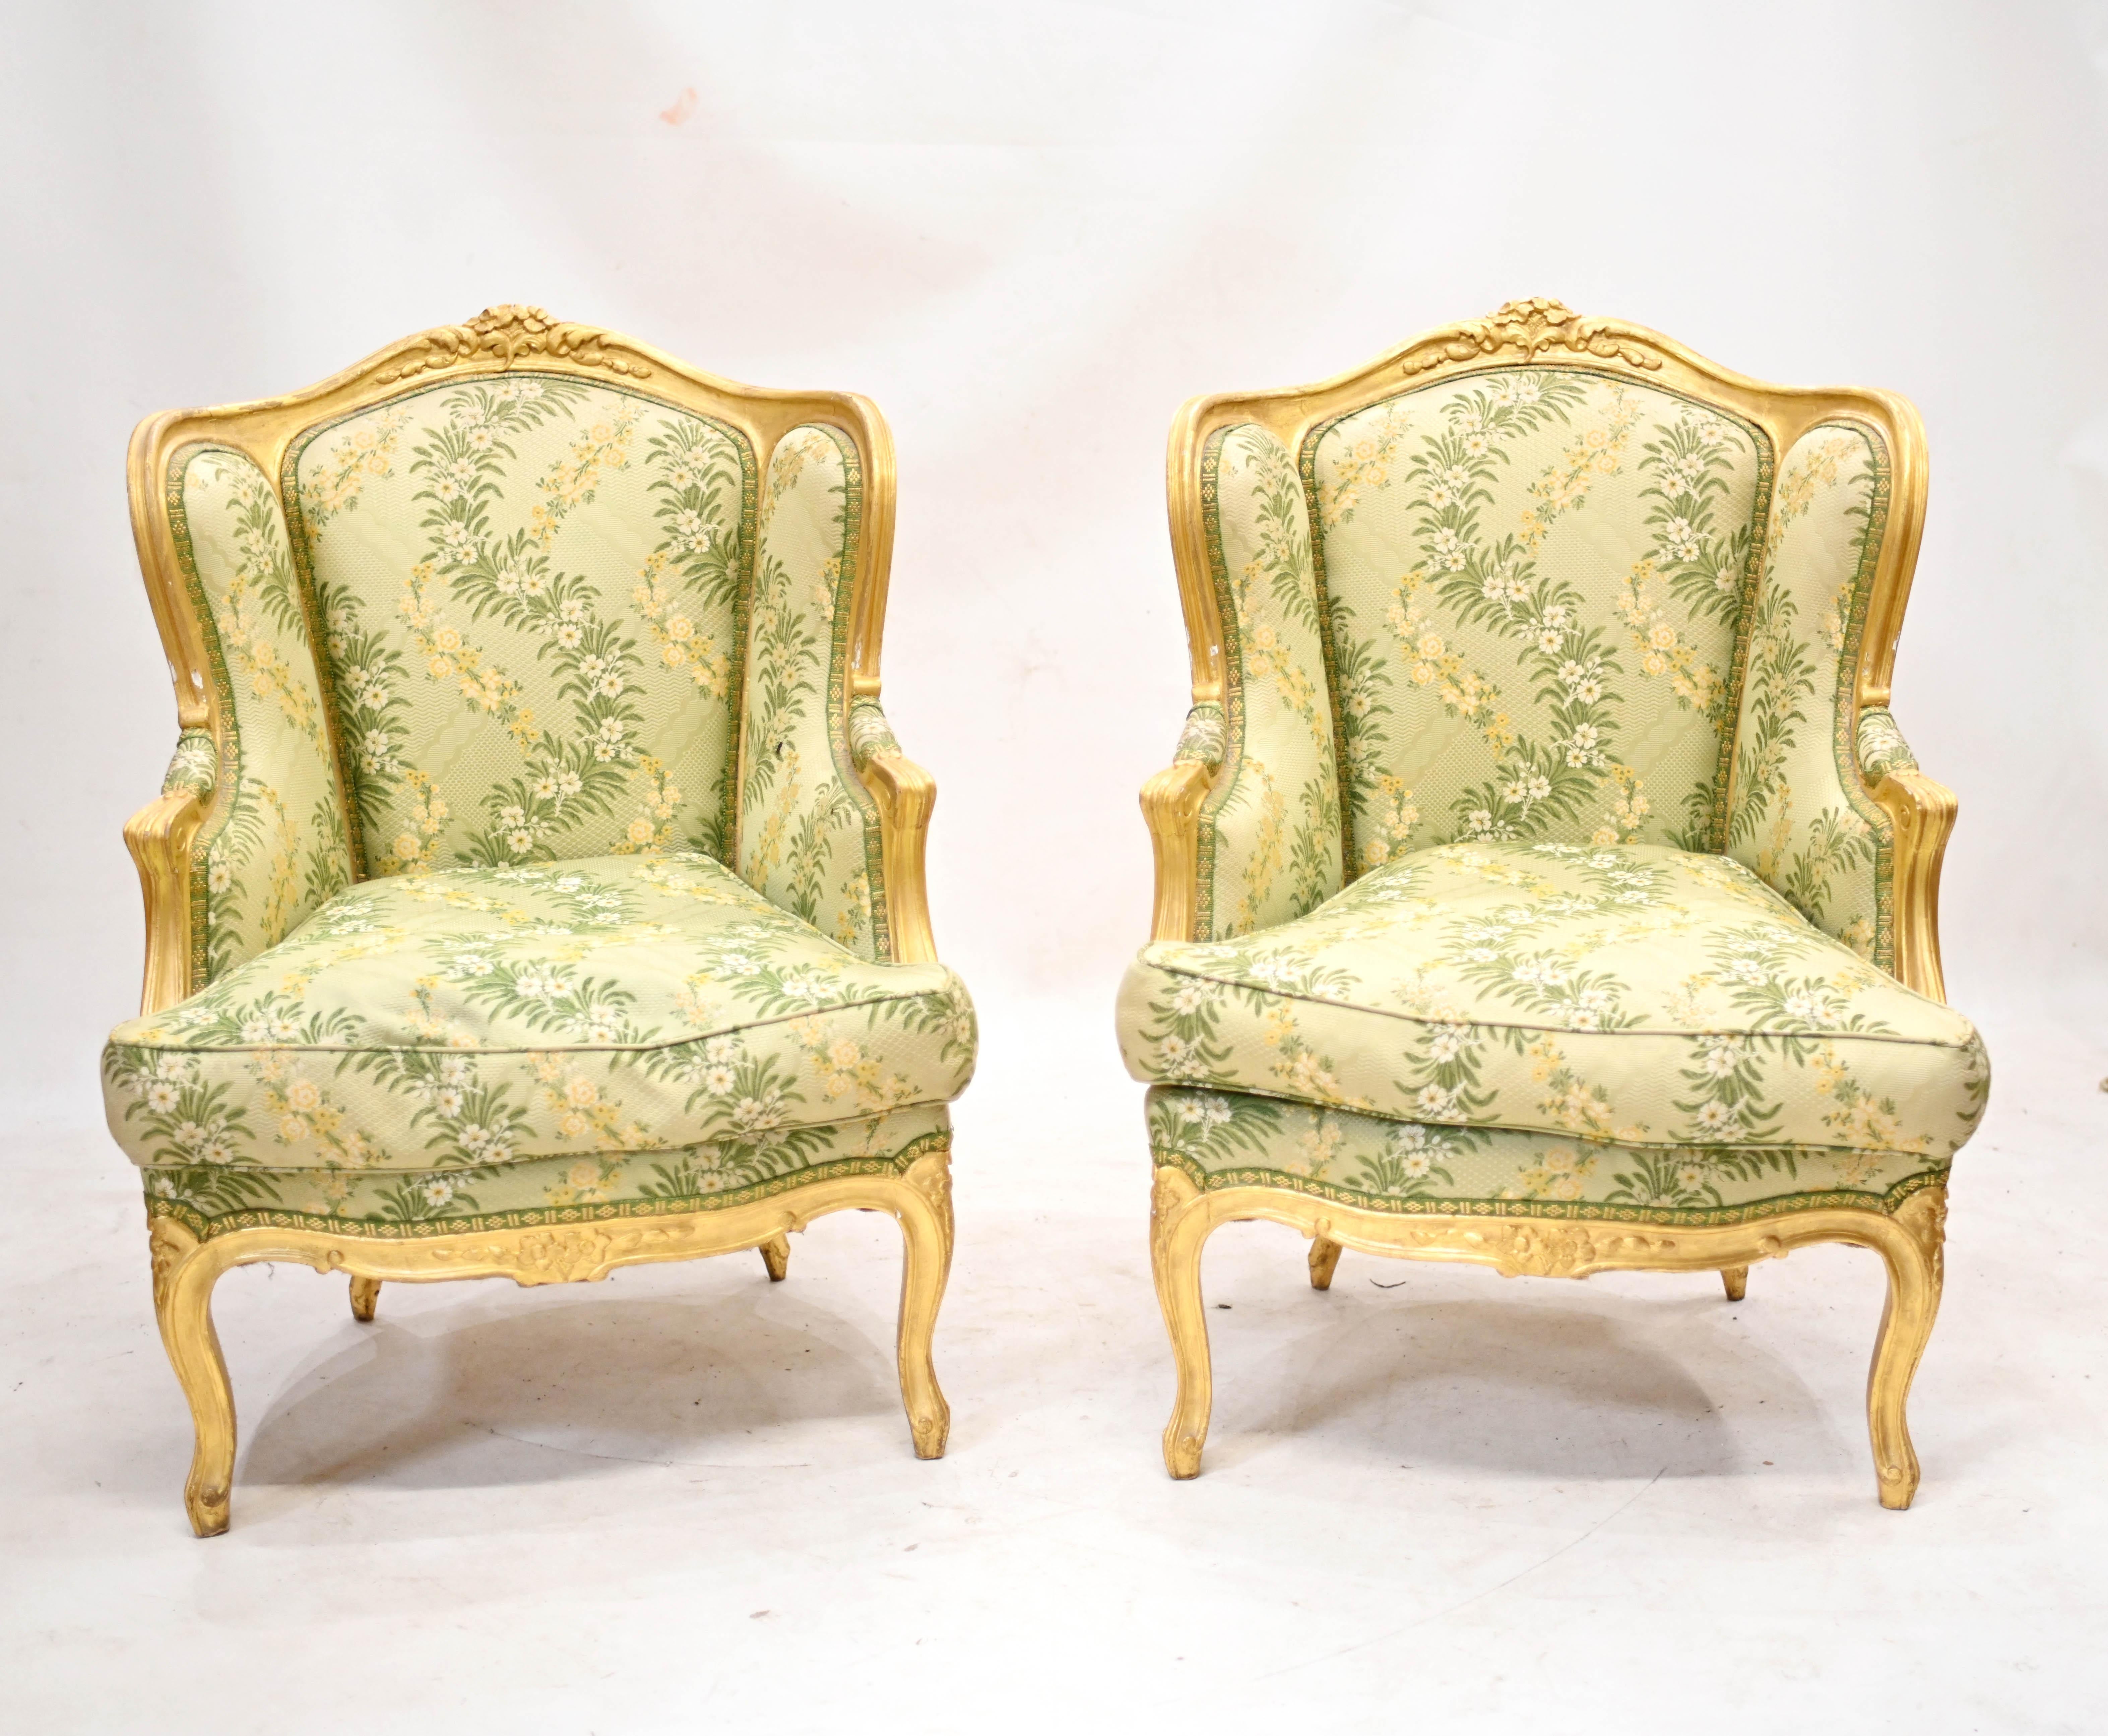 Pair French gilt arm chairs with hand woven fabric
Quality pair of French fauteuils recently upholstered with applied gold leaf decoration
As recently upholstered free from previous owners odours such as pets and smoke
Very comfortable to sit in